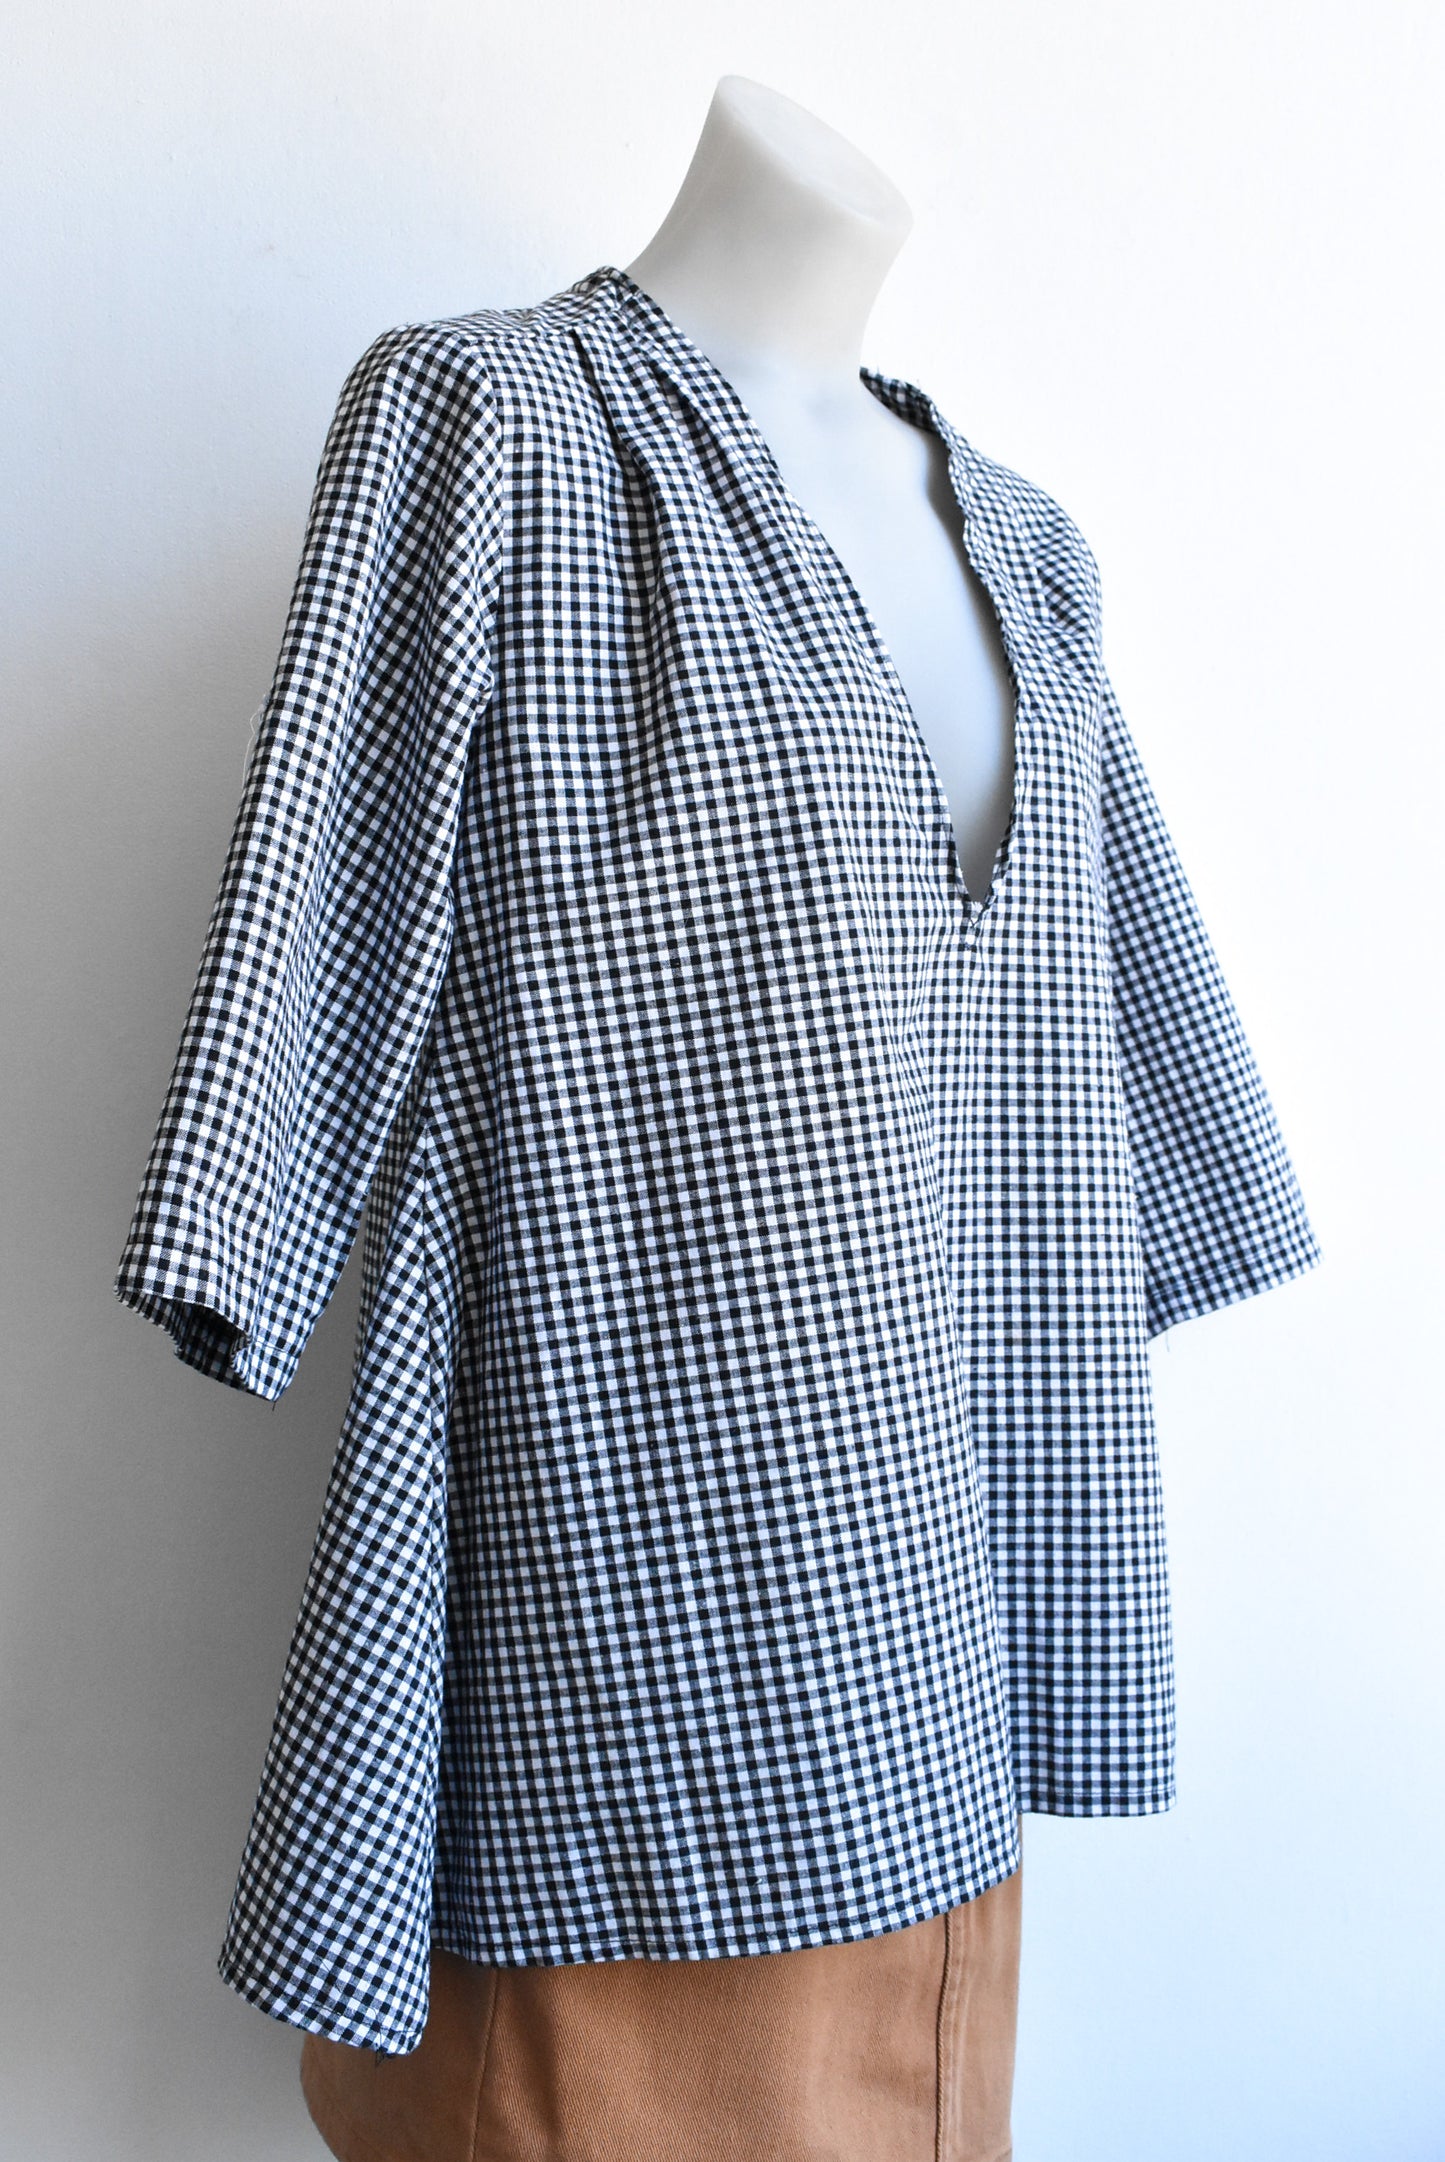 Black and white checked top, size XL